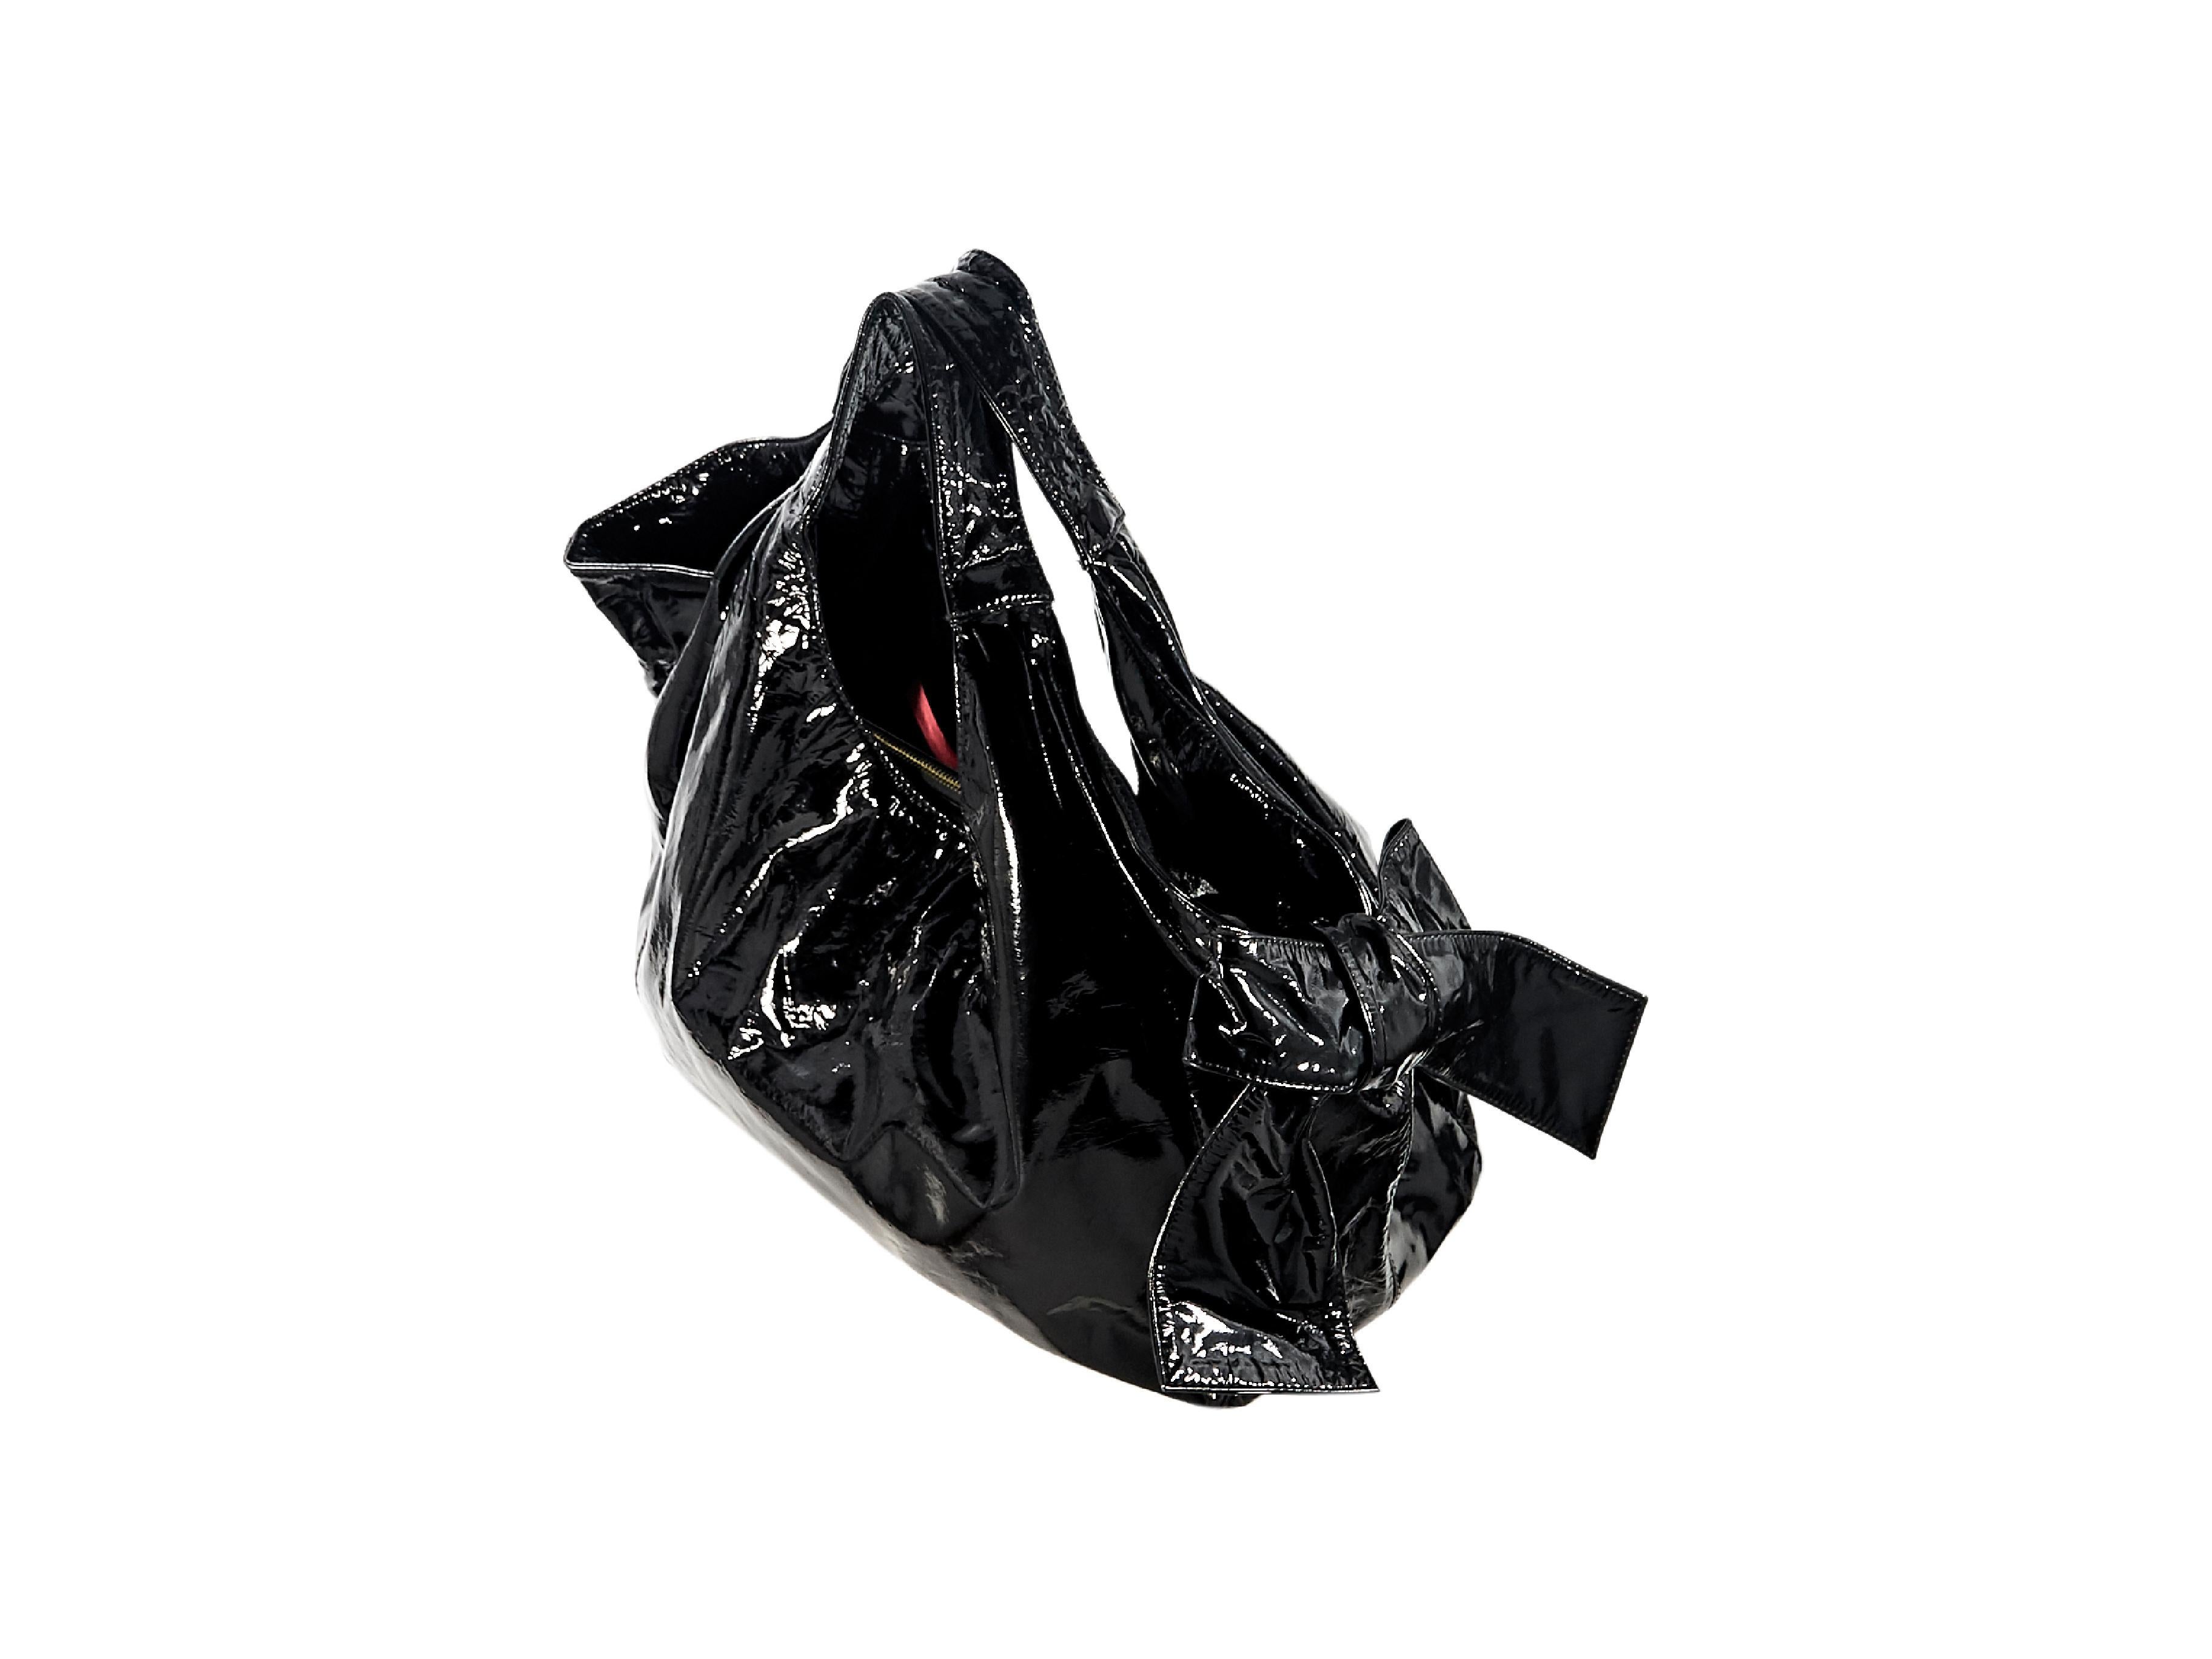 Product details:  Black patent leather Nuage Bow shoulder bag by Valentino.  Dual shoulder straps.  Open top.  Lined interior with inner center zip compartment and inner zip pocket.  Goldtone hardware.  19